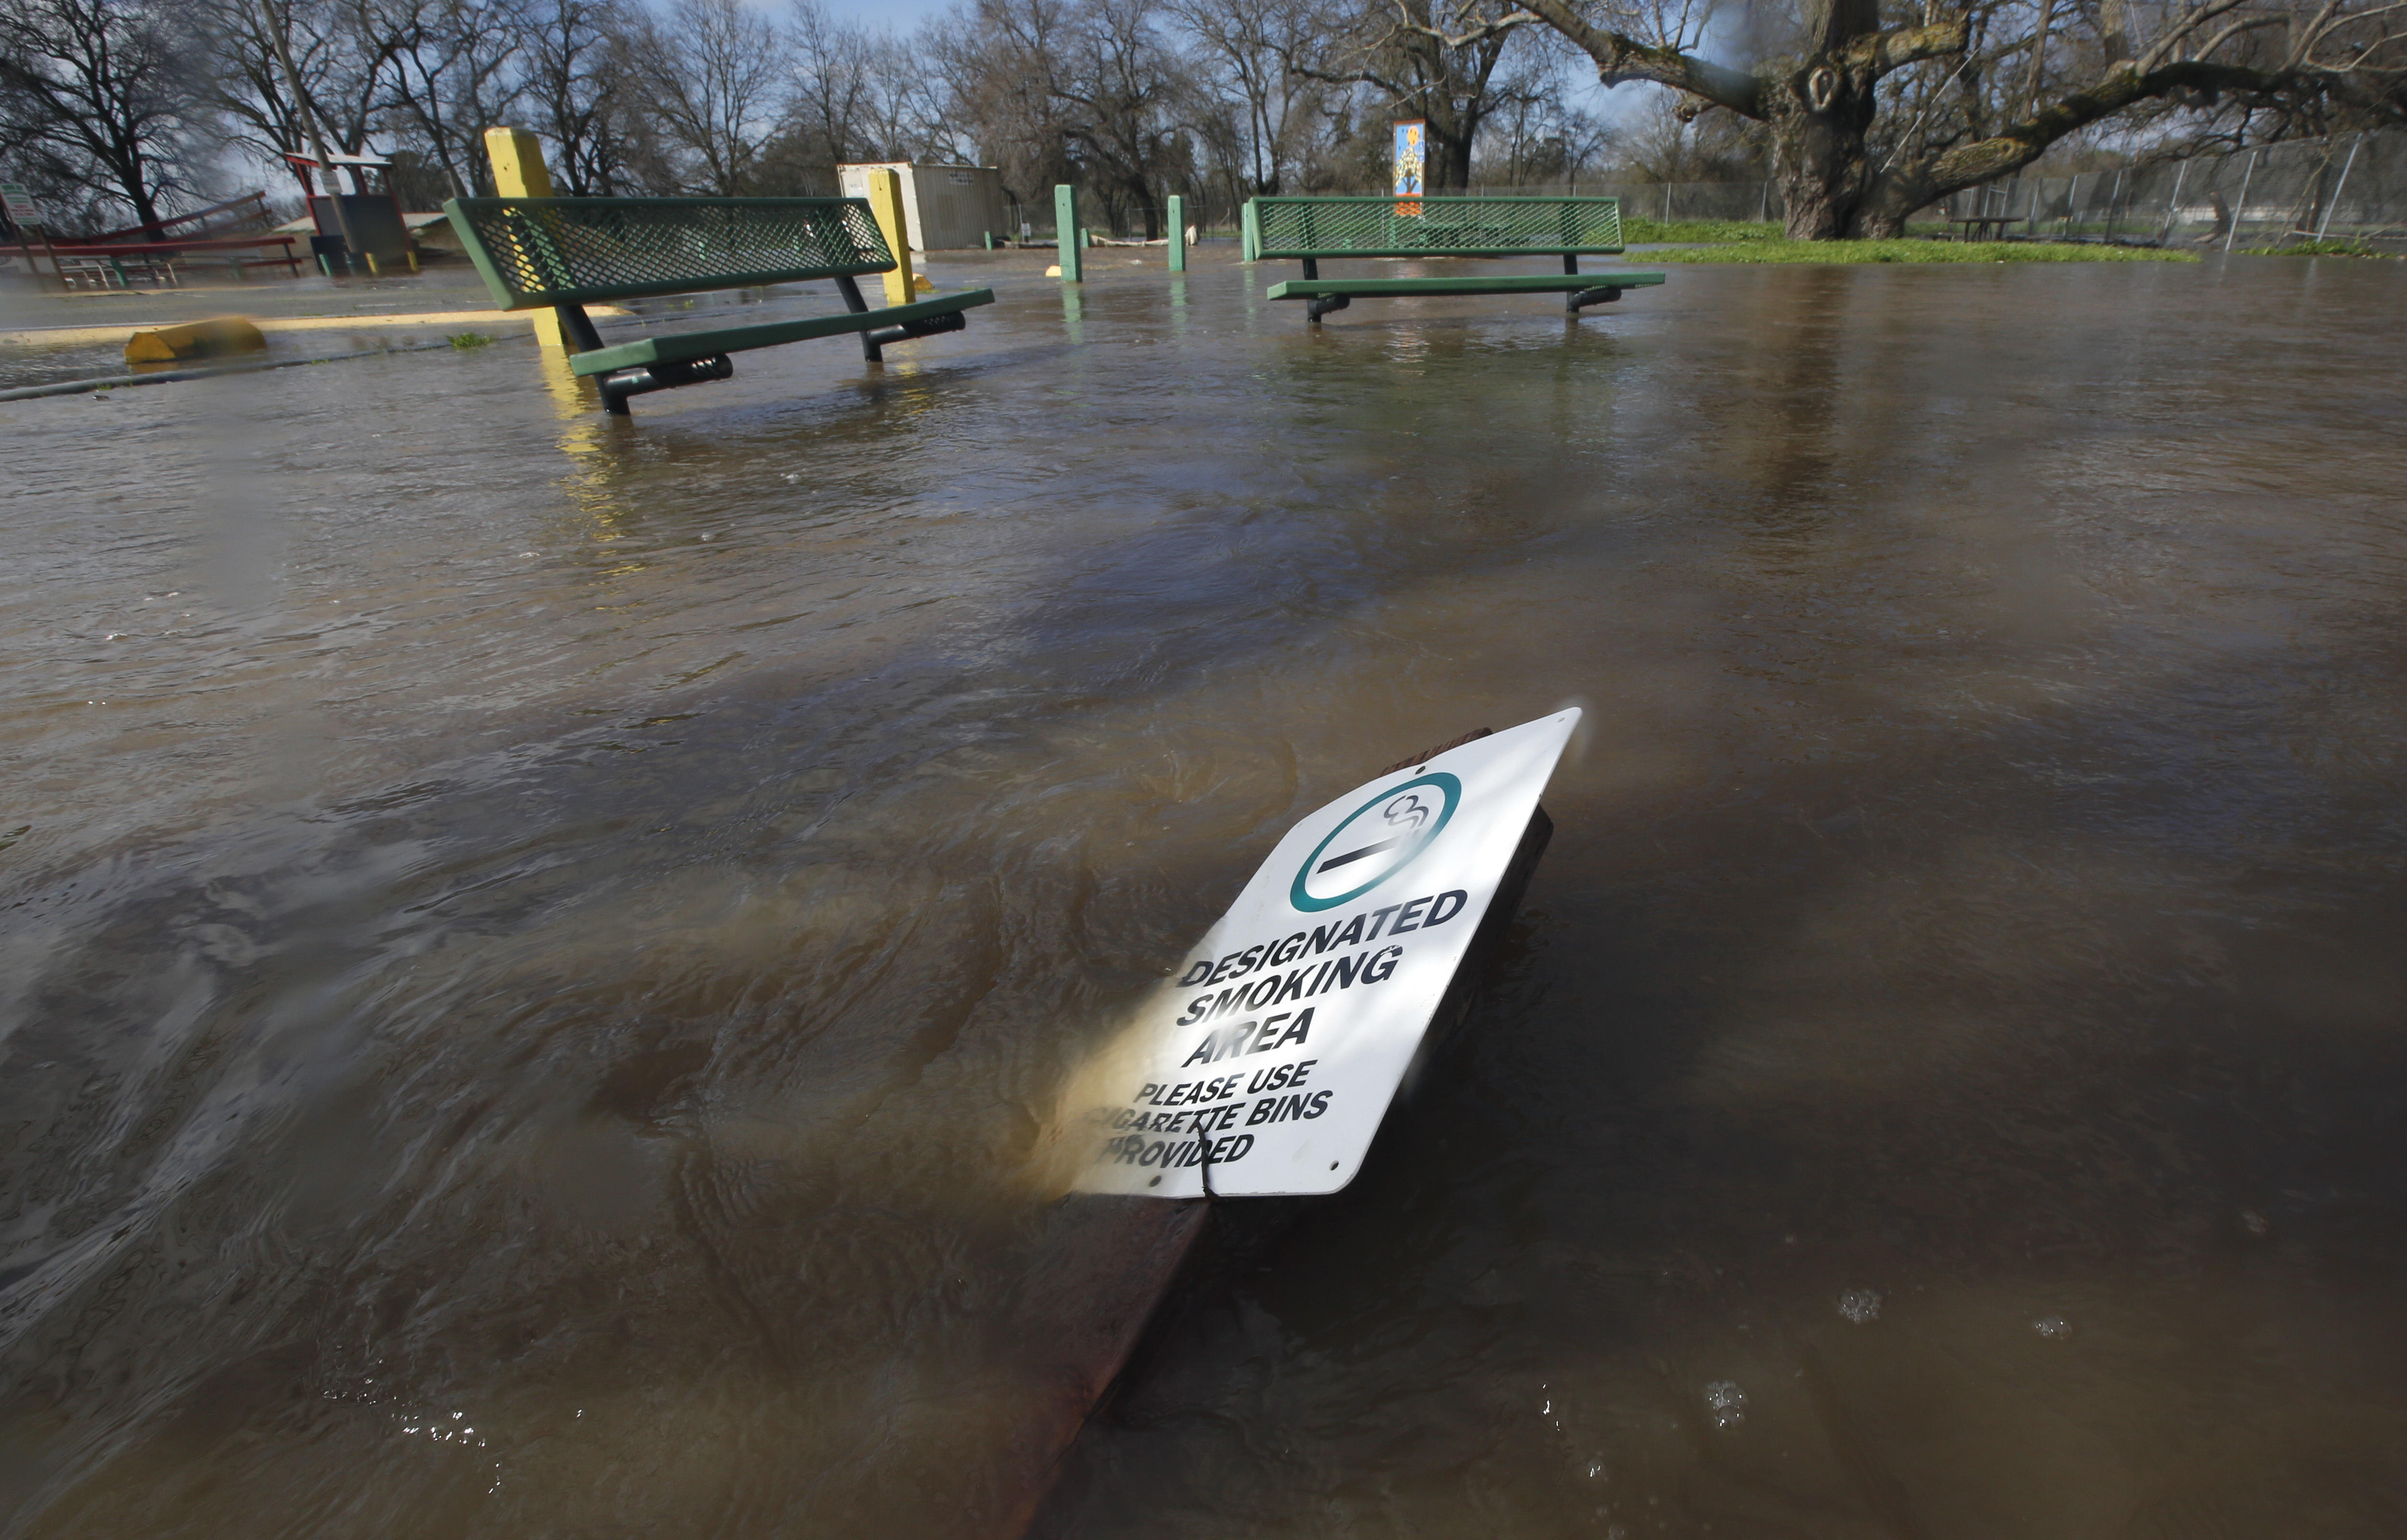 Latest storm gone but Northern California flooding fears grow as dams